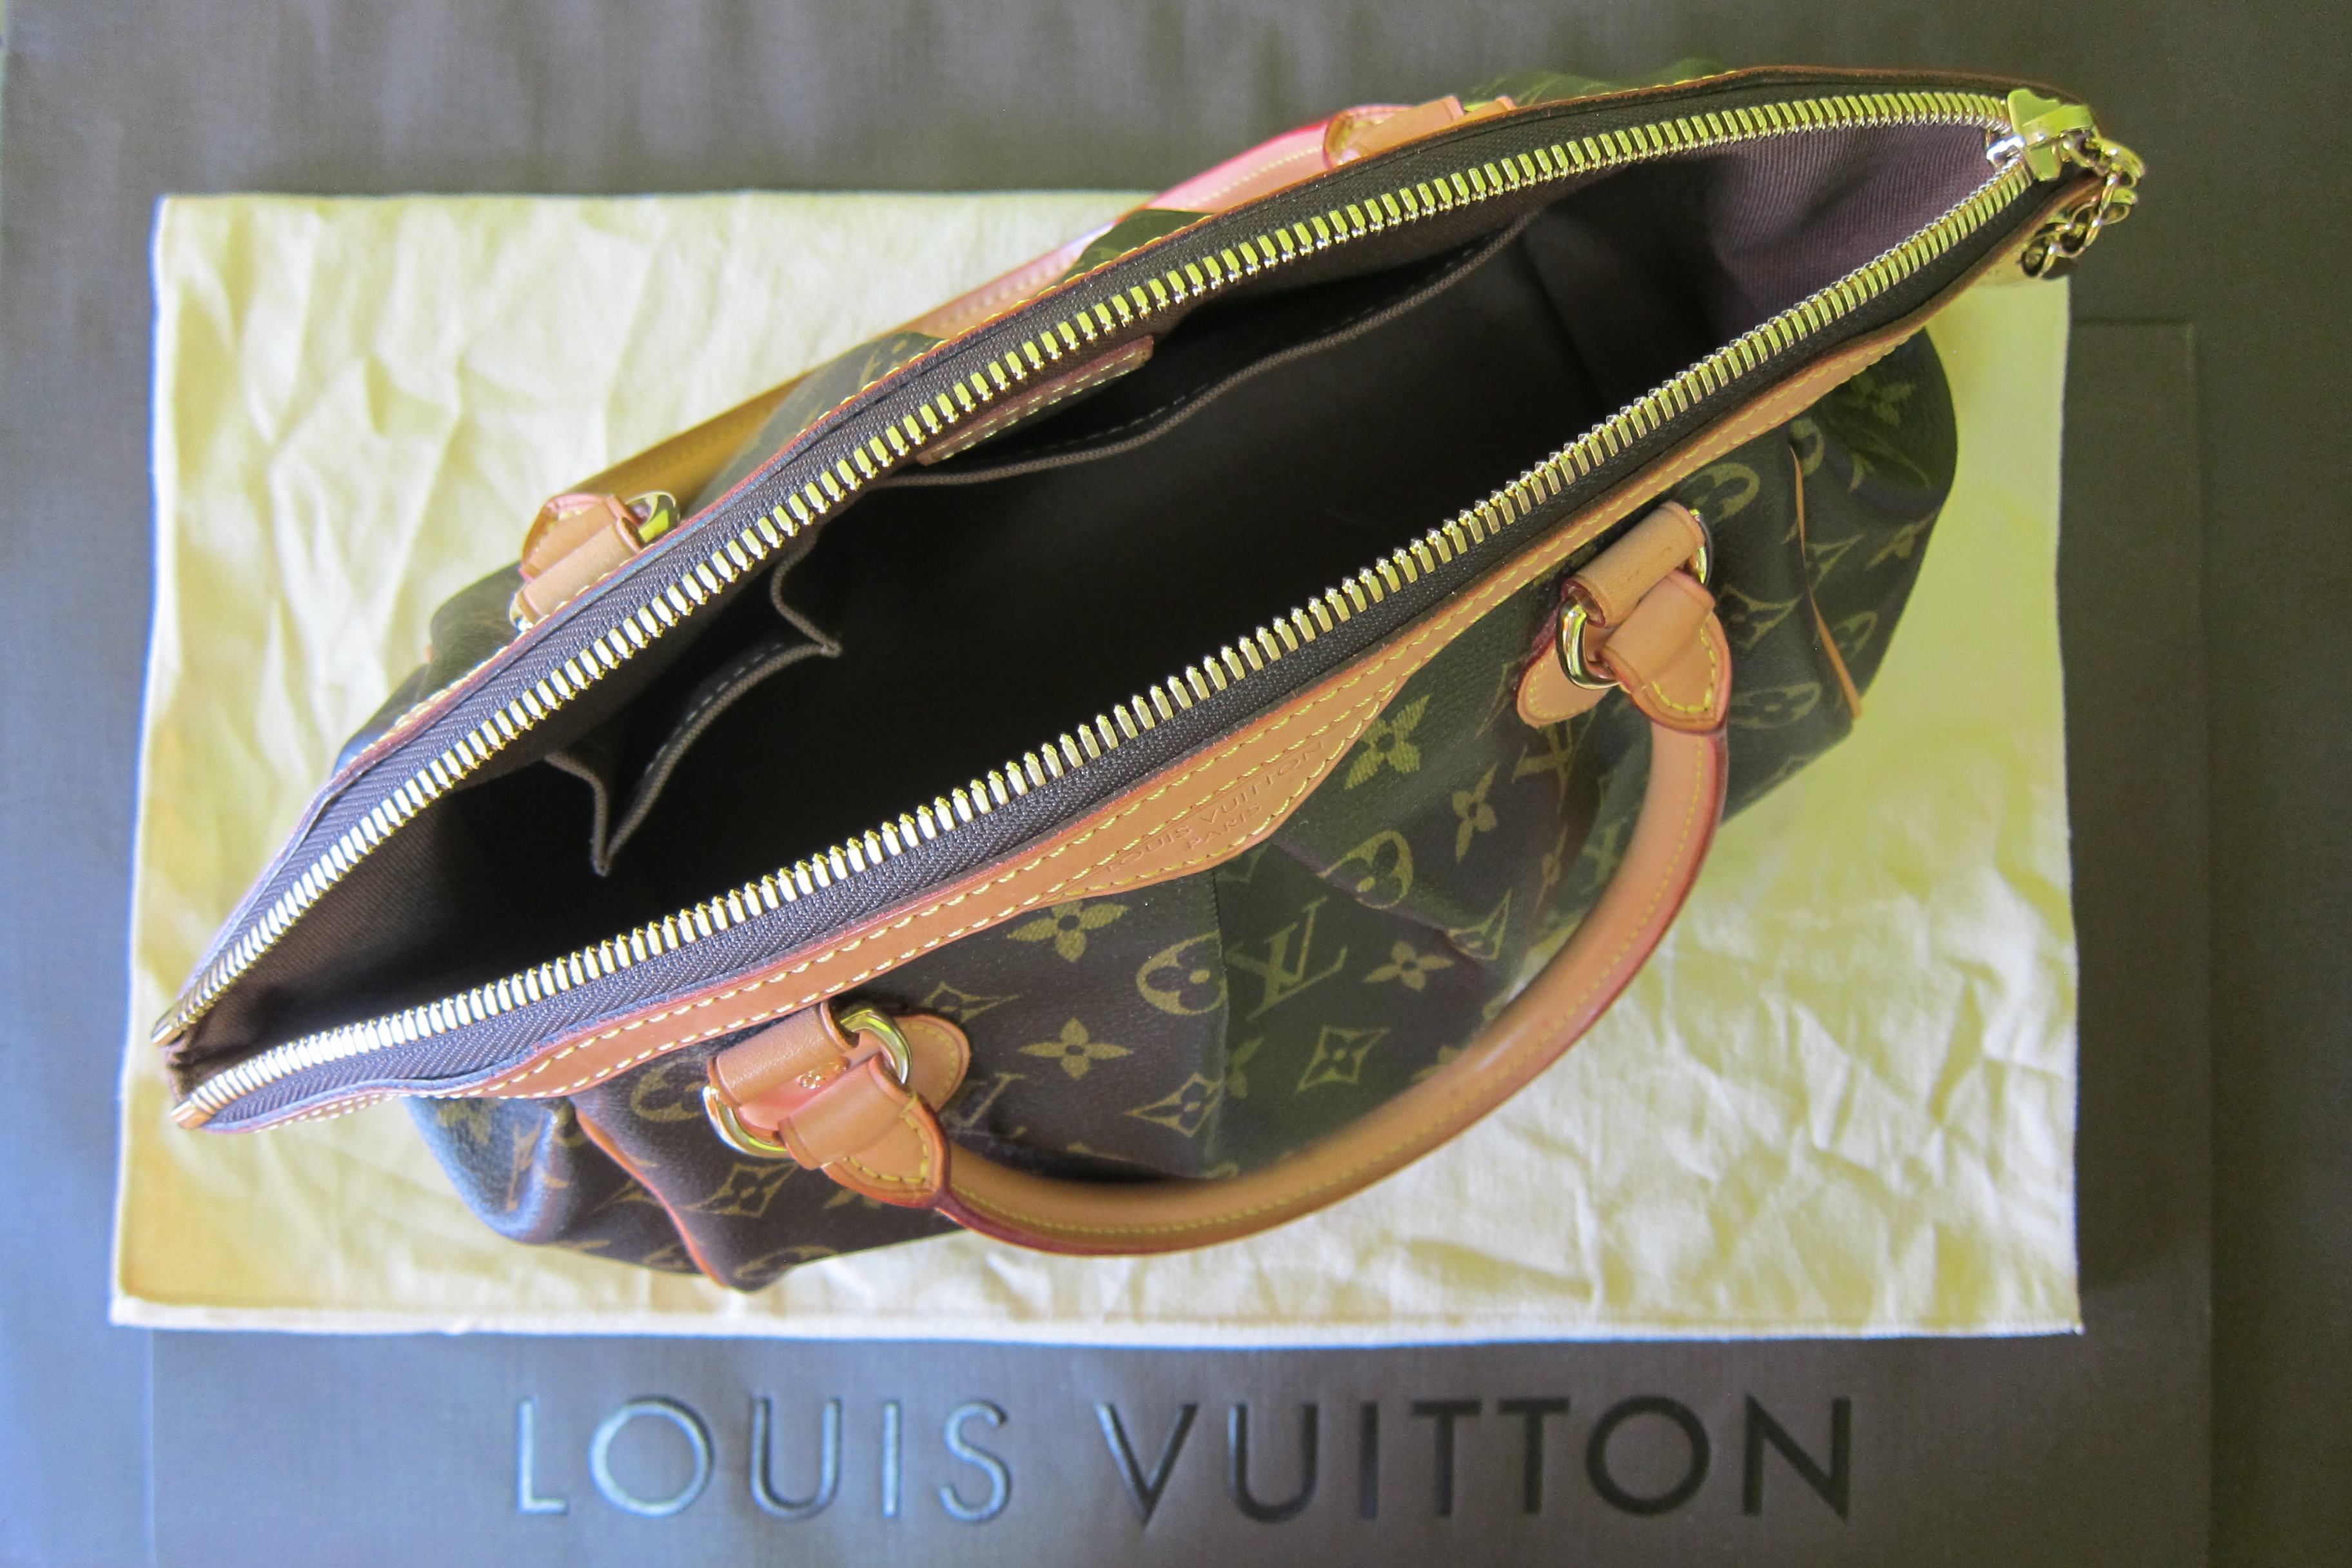 Louis Vuitton Tivoli Pm Price Singapore | Confederated Tribes of the Umatilla Indian Reservation